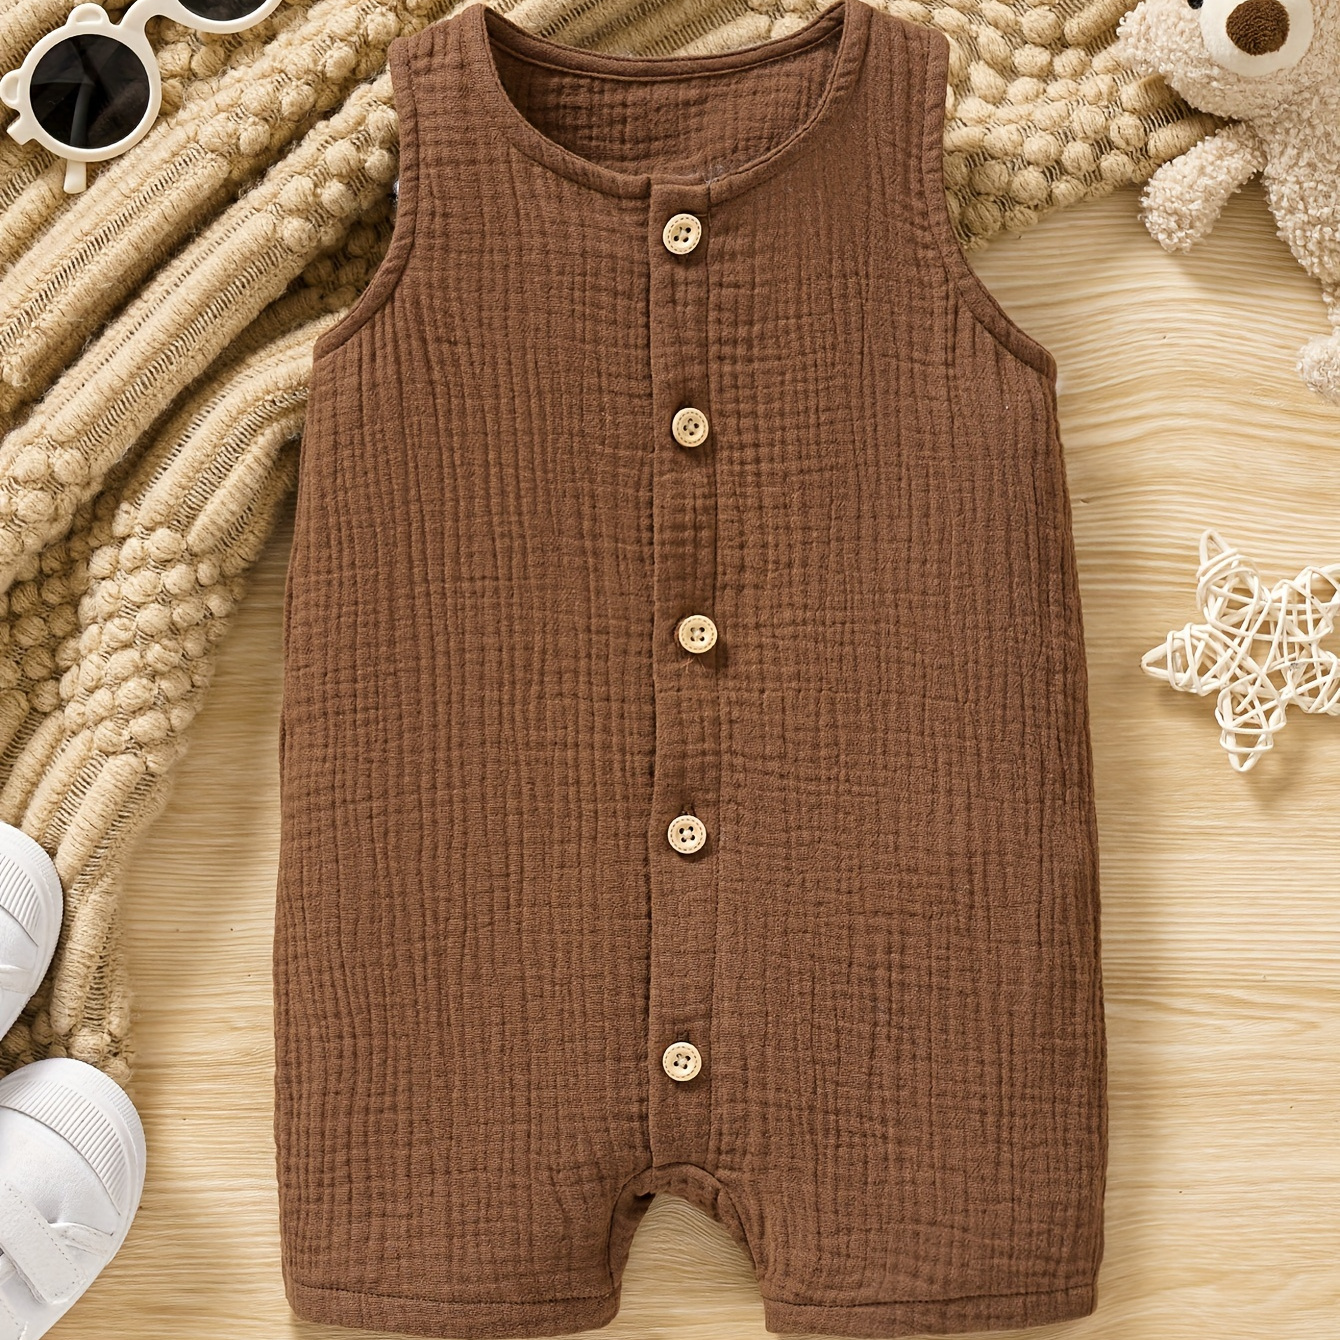 

Baby's Comfy Cotton Muslin Button Front Bodysuit, Casual Solid Color Sleeveless Romper, Toddler & Infant Boy's Clothing